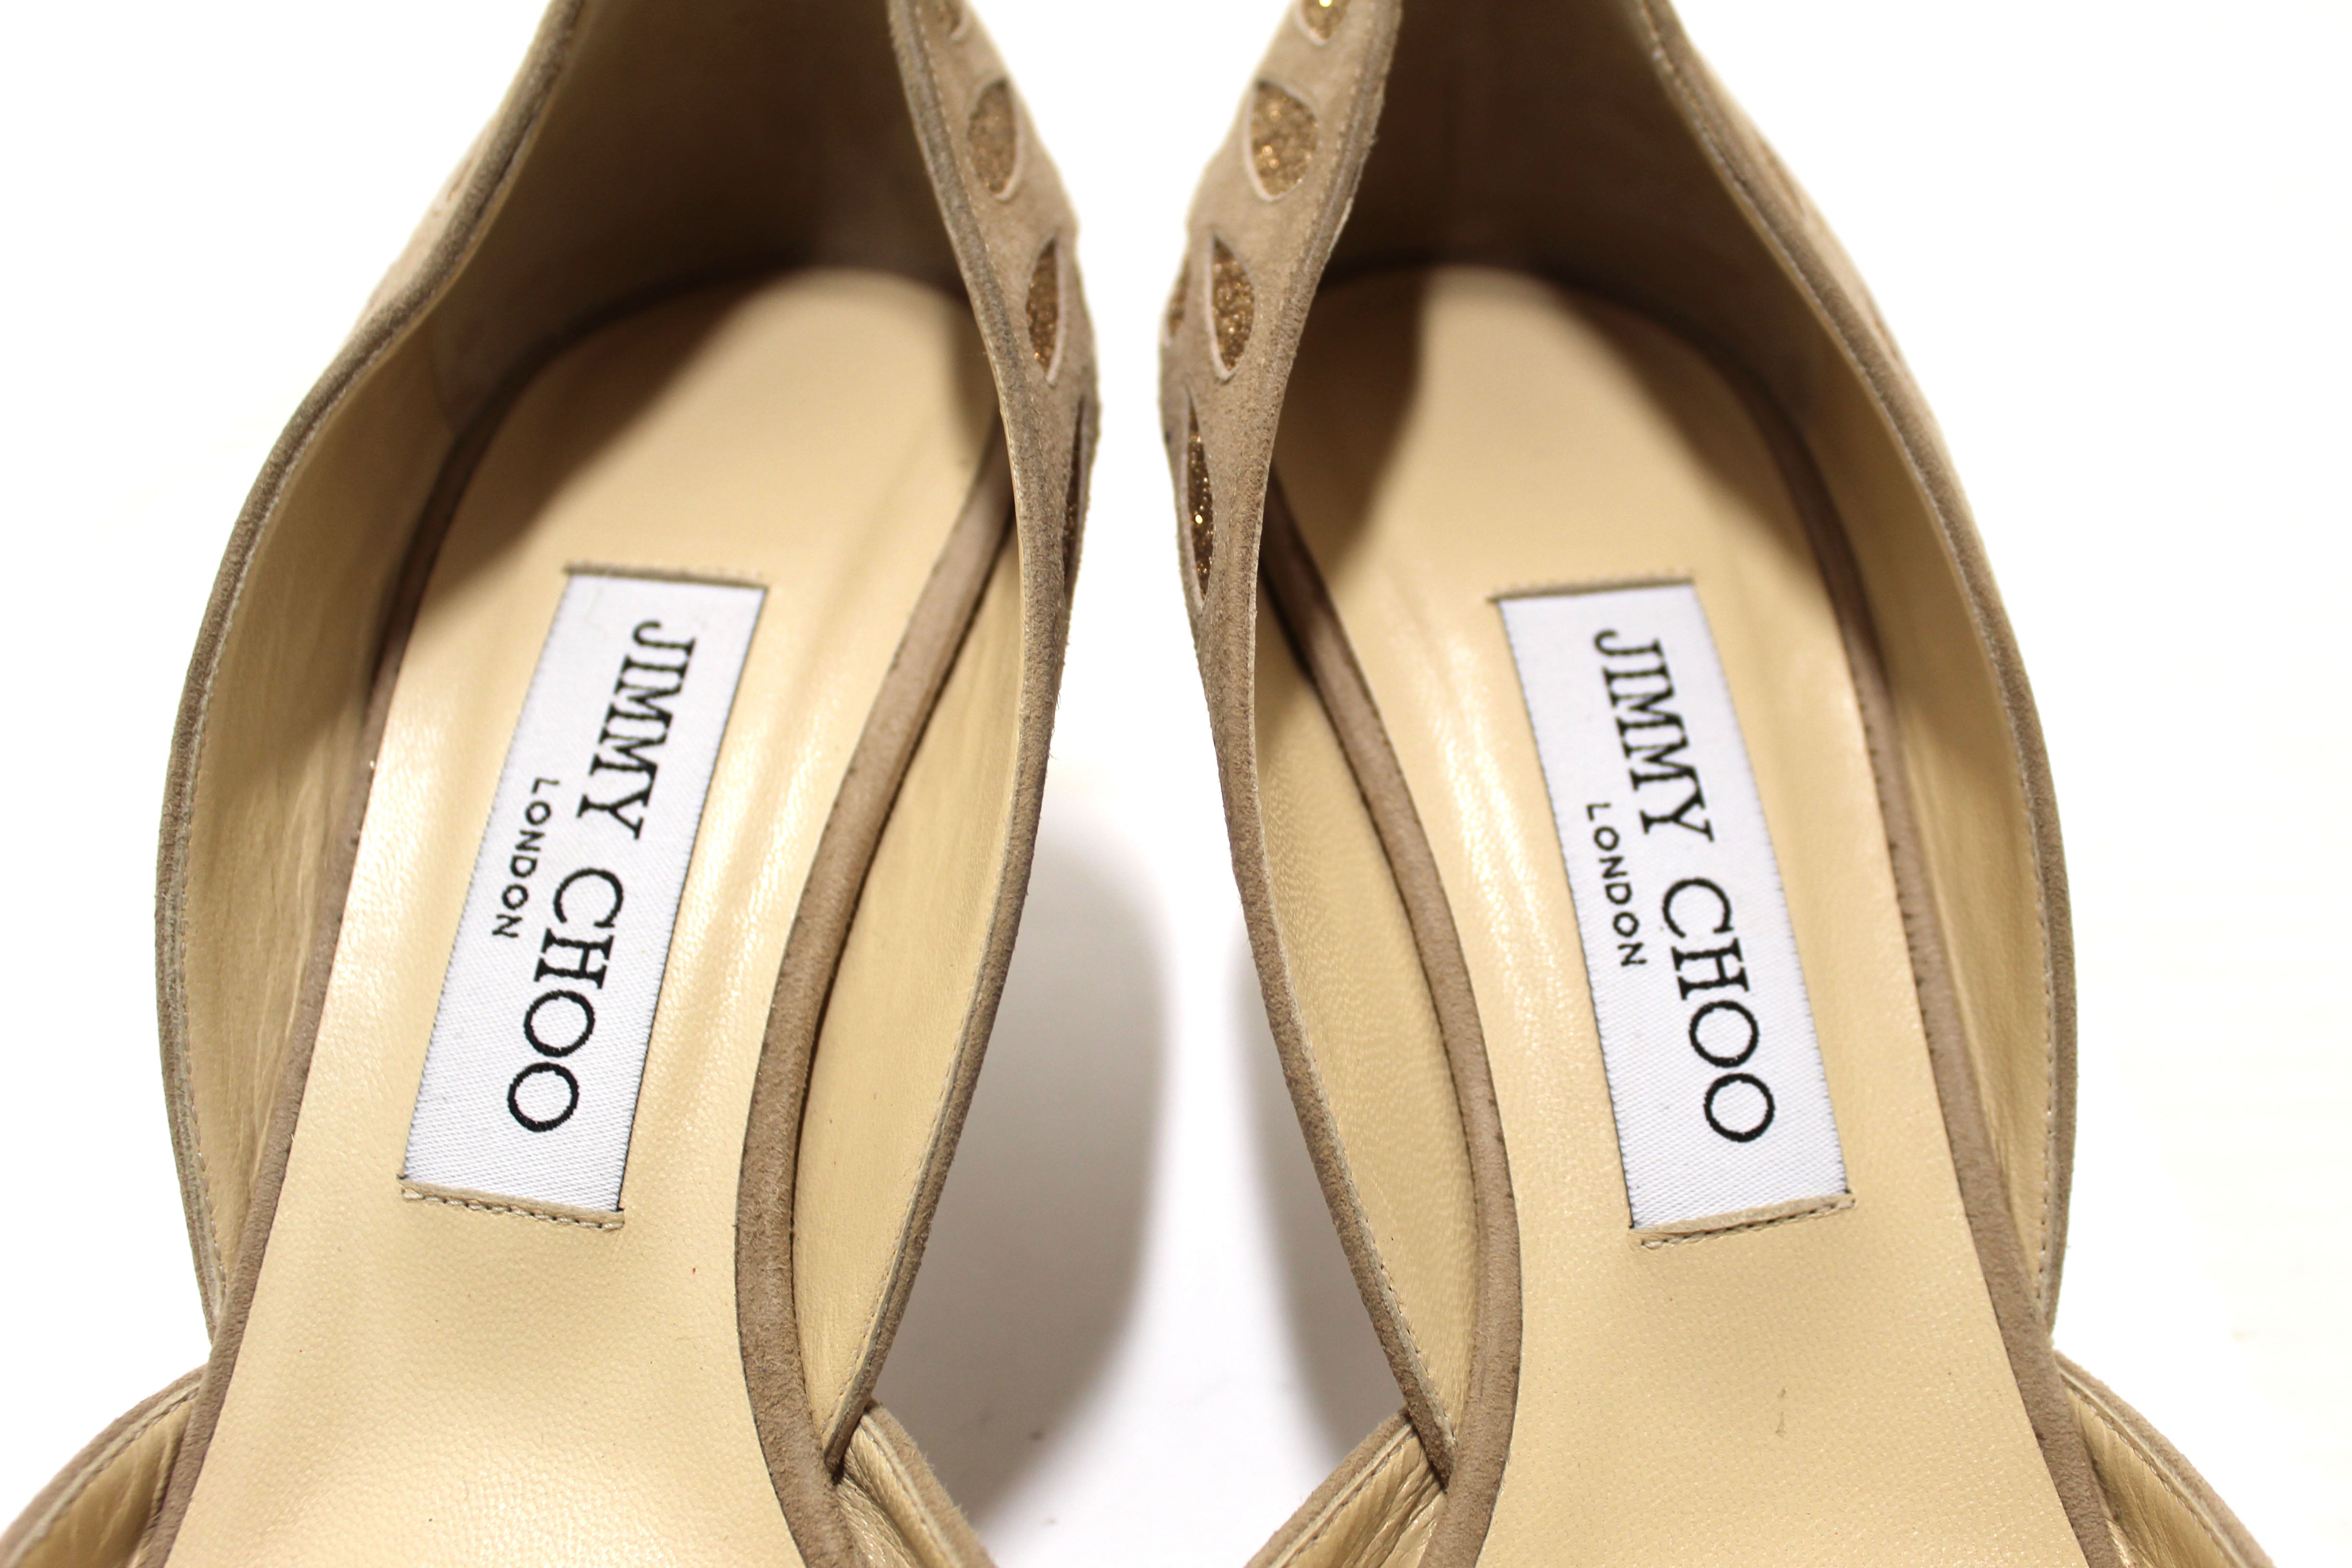 NEW Authentic Jimmy Choo Nude Suede Daysha 65 Heel Shoes Size 38